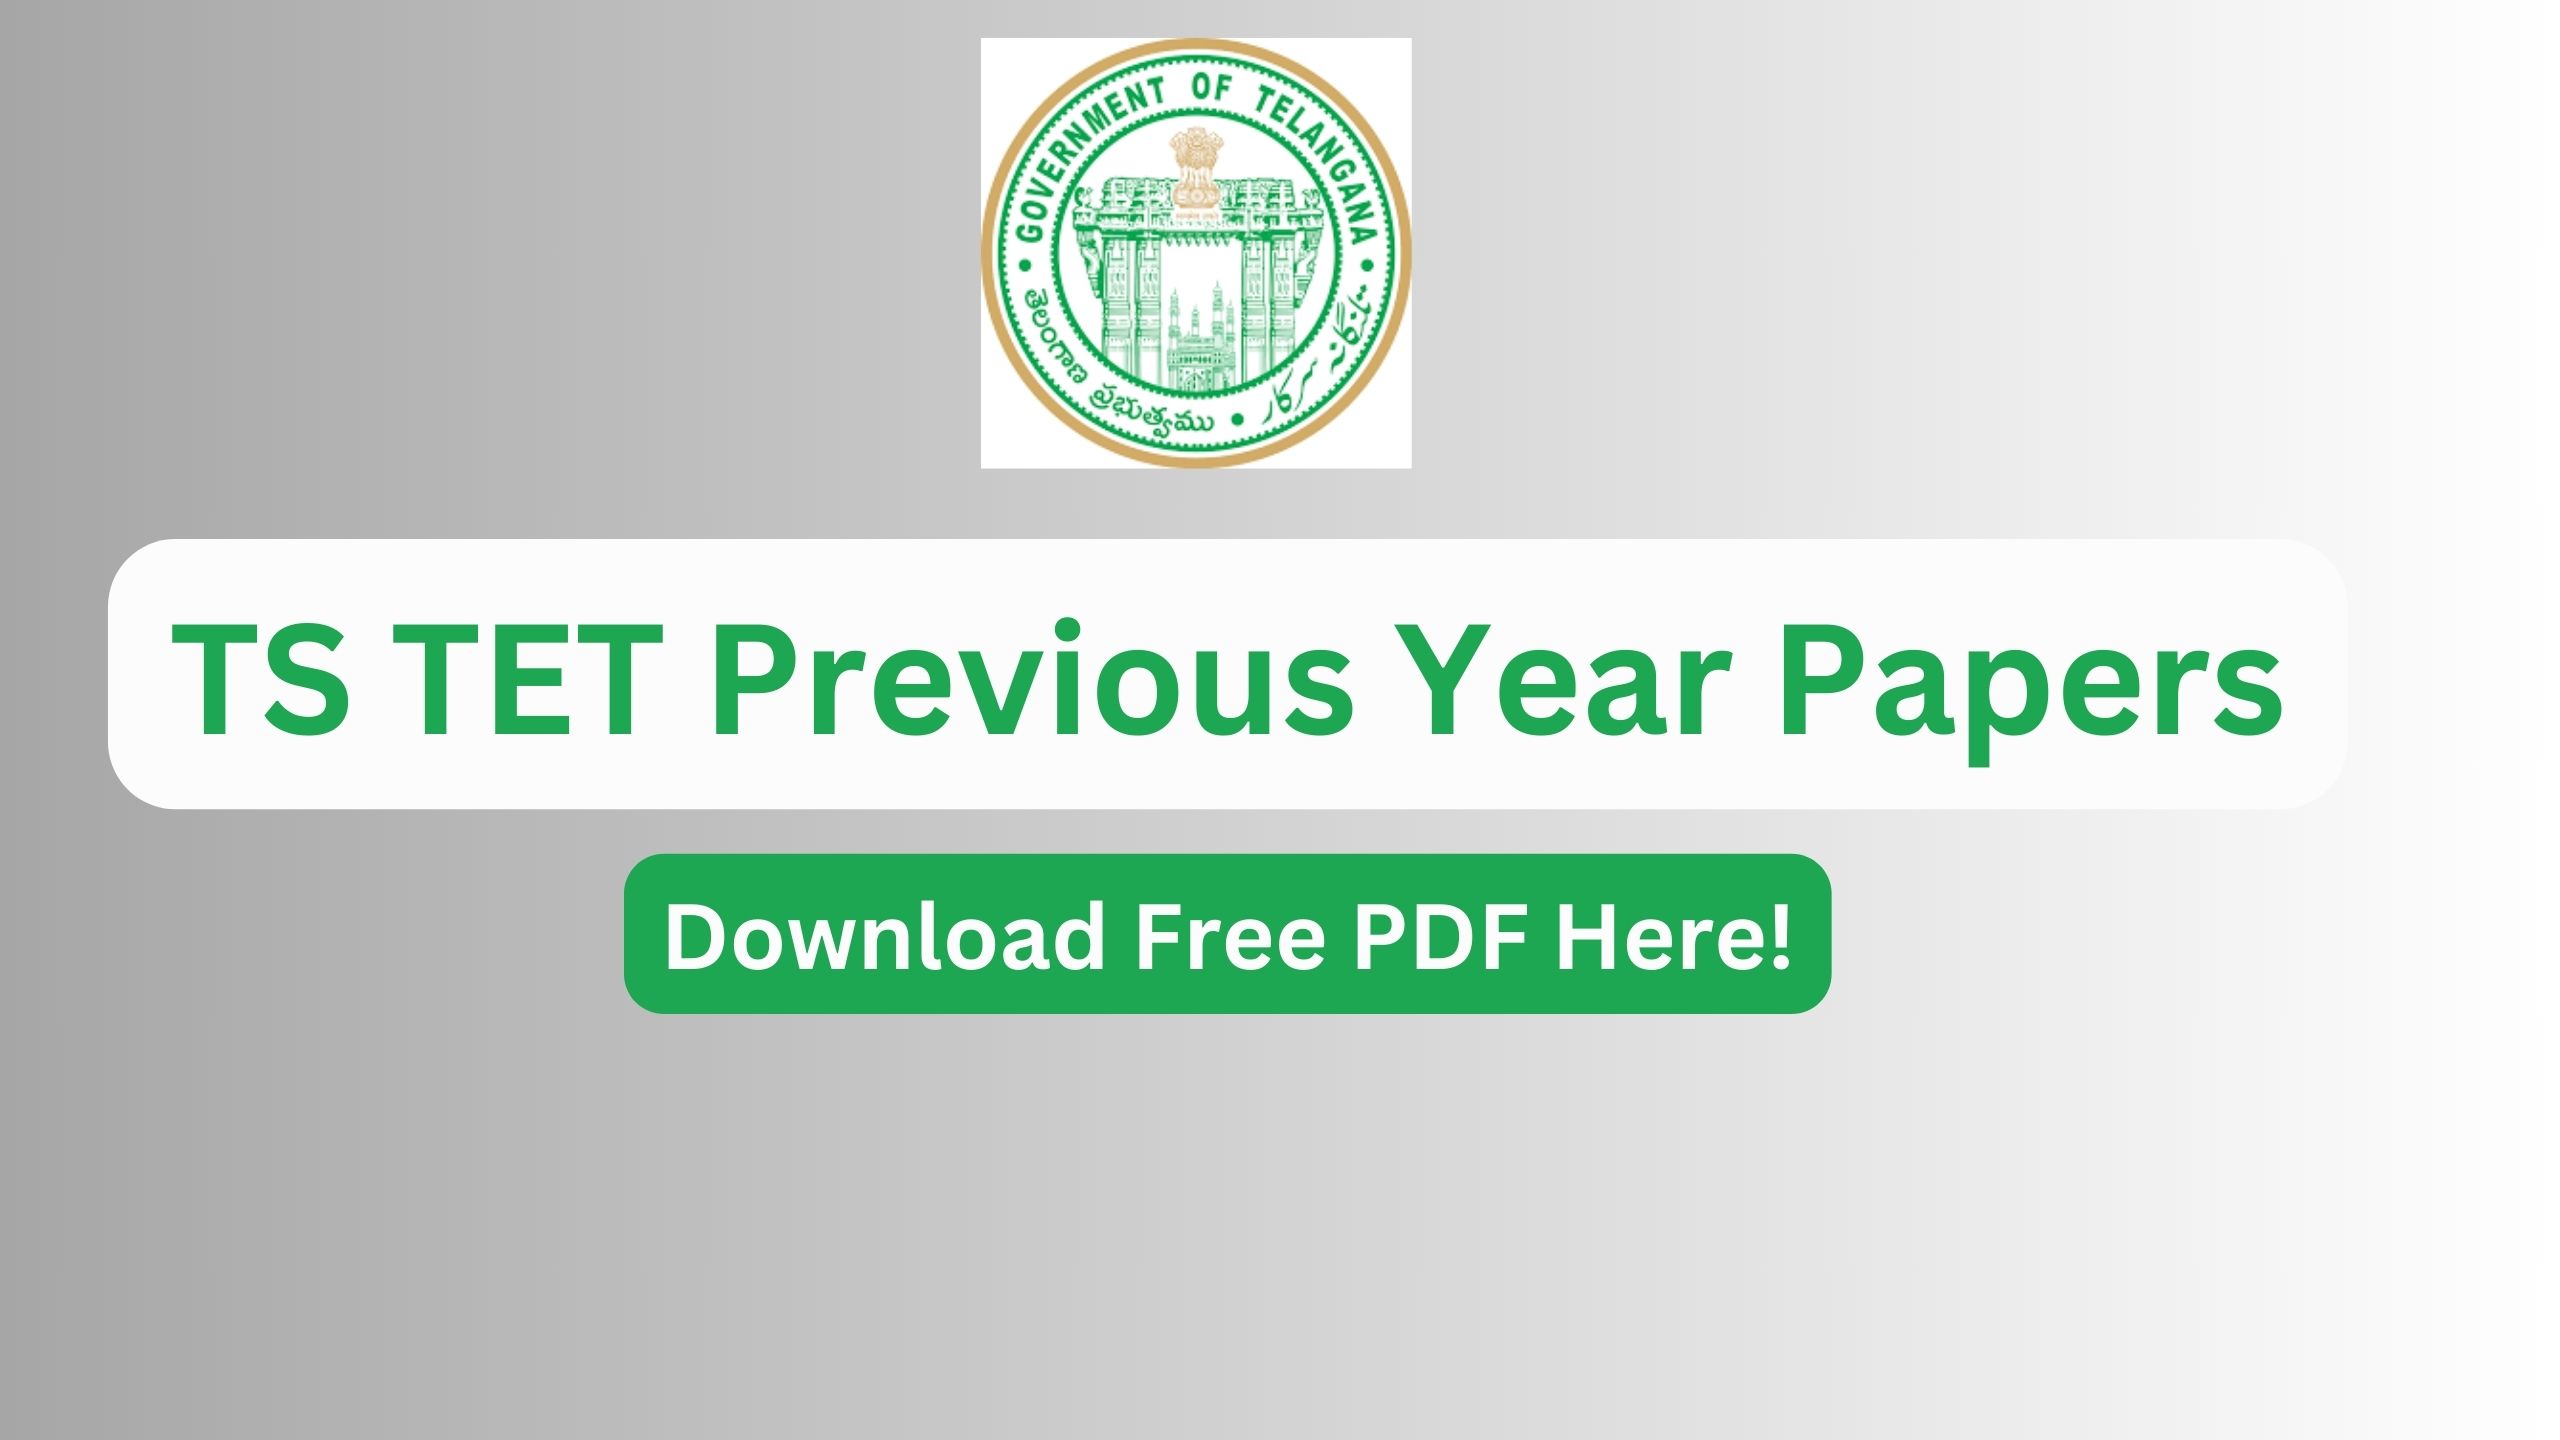 TS TET Previous Year Papers